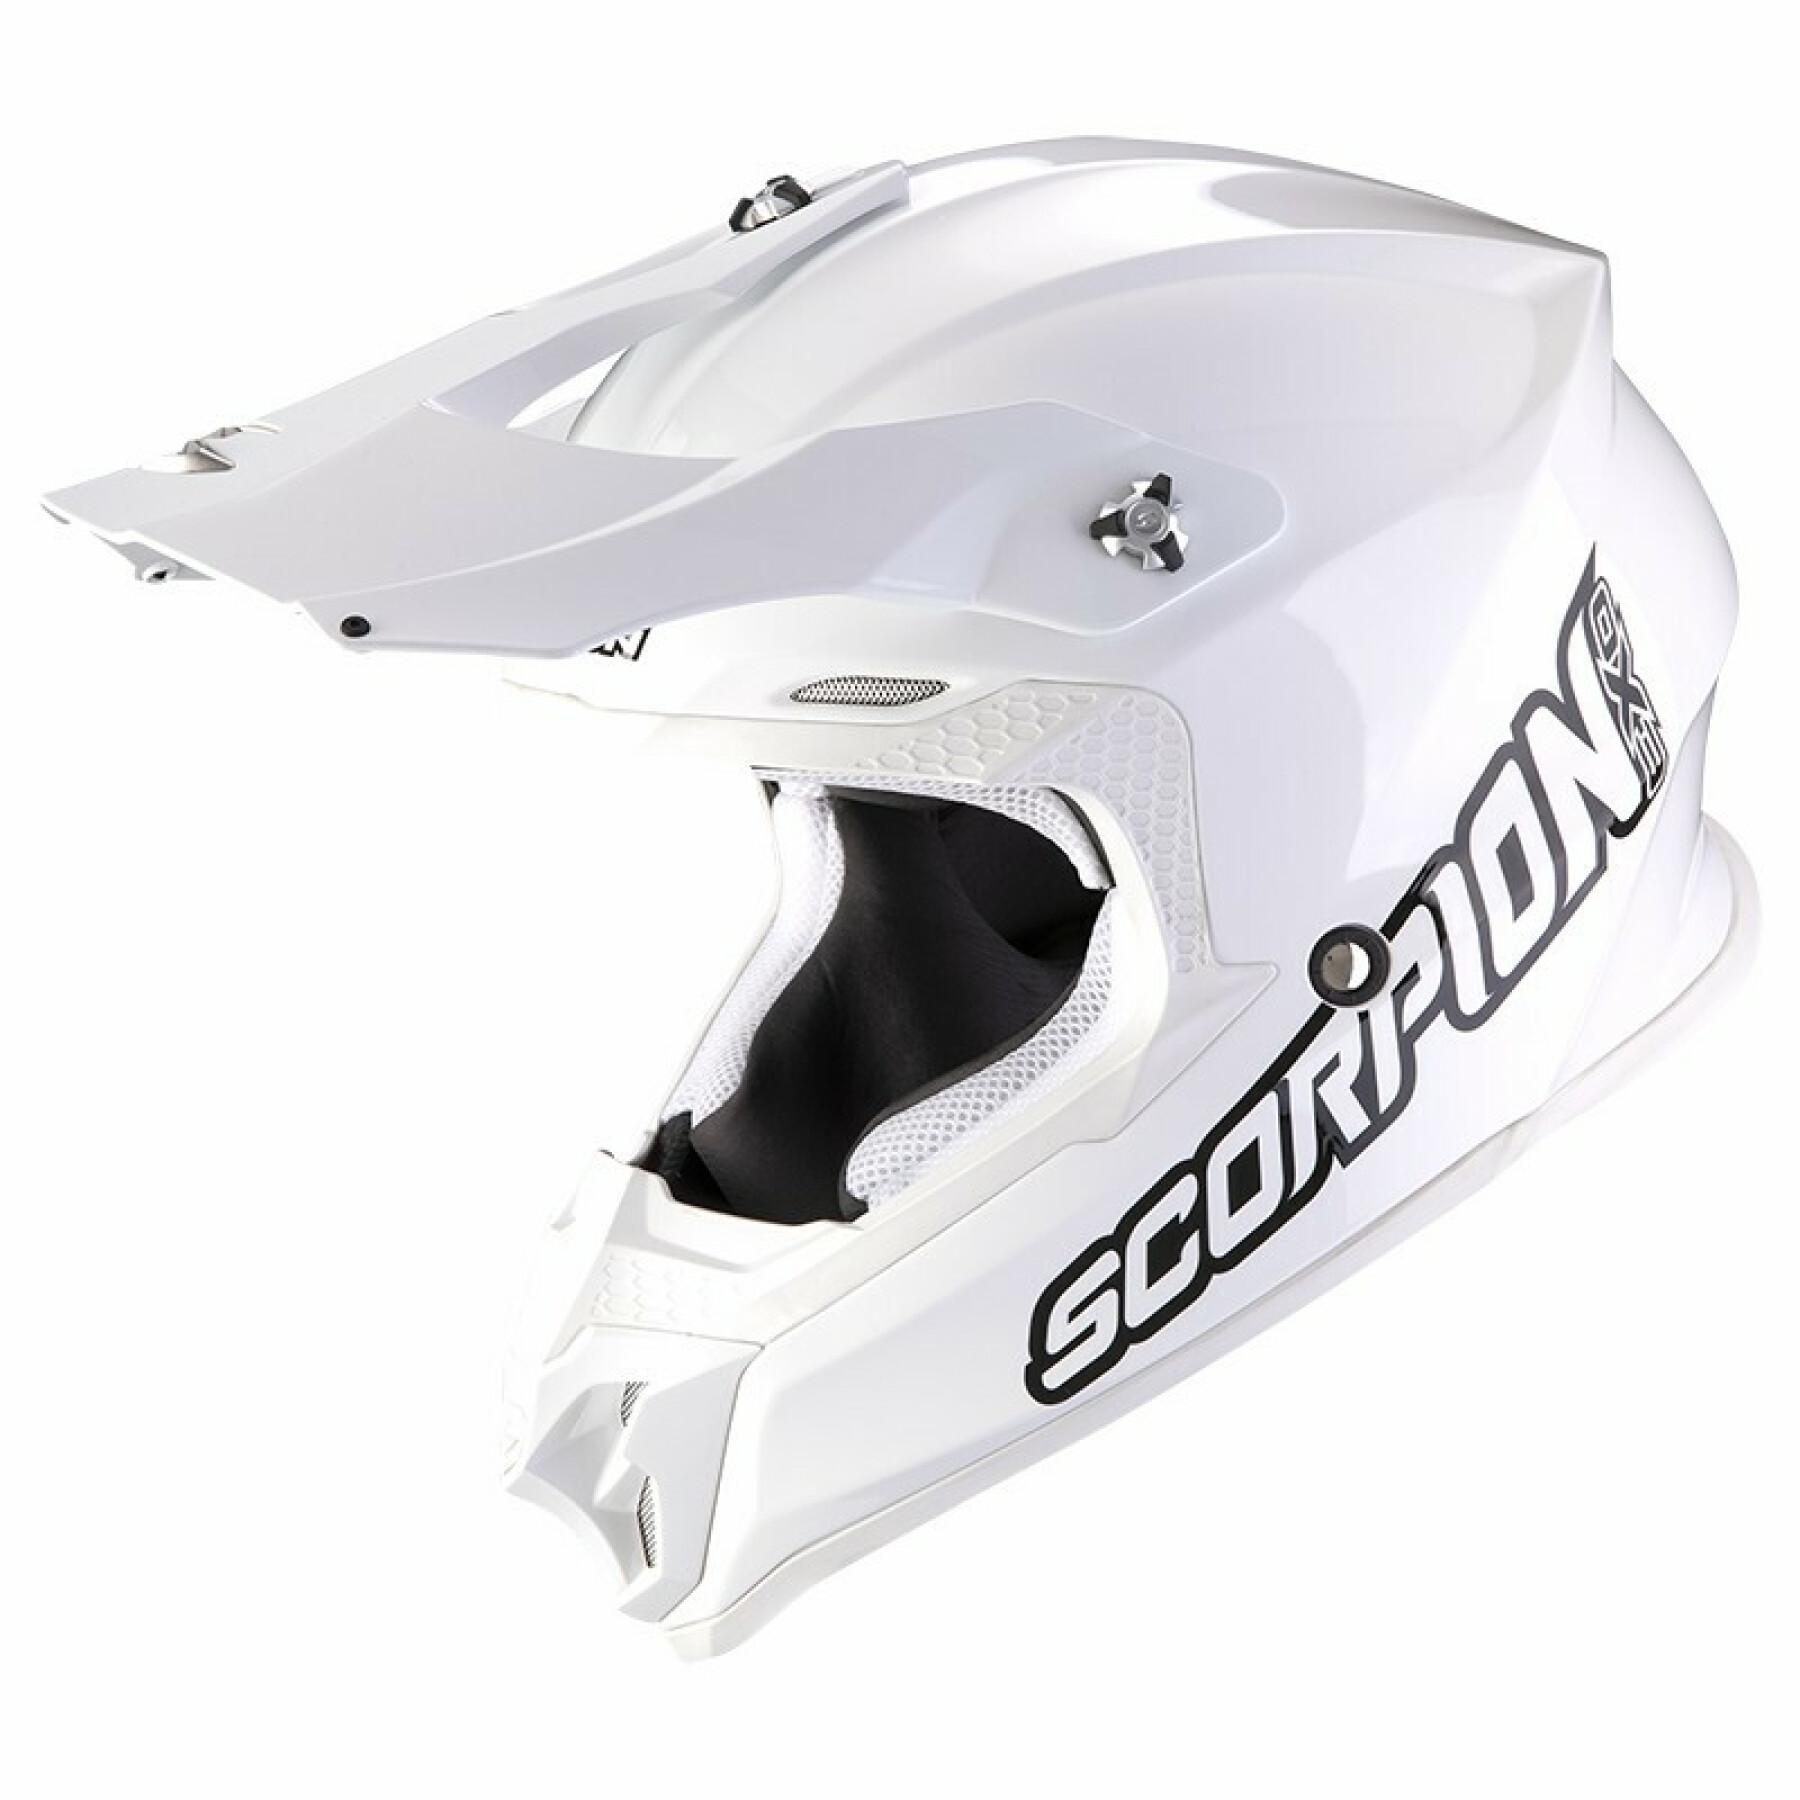 Kask krzyżowy Scorpion VX-16 Air SOLID